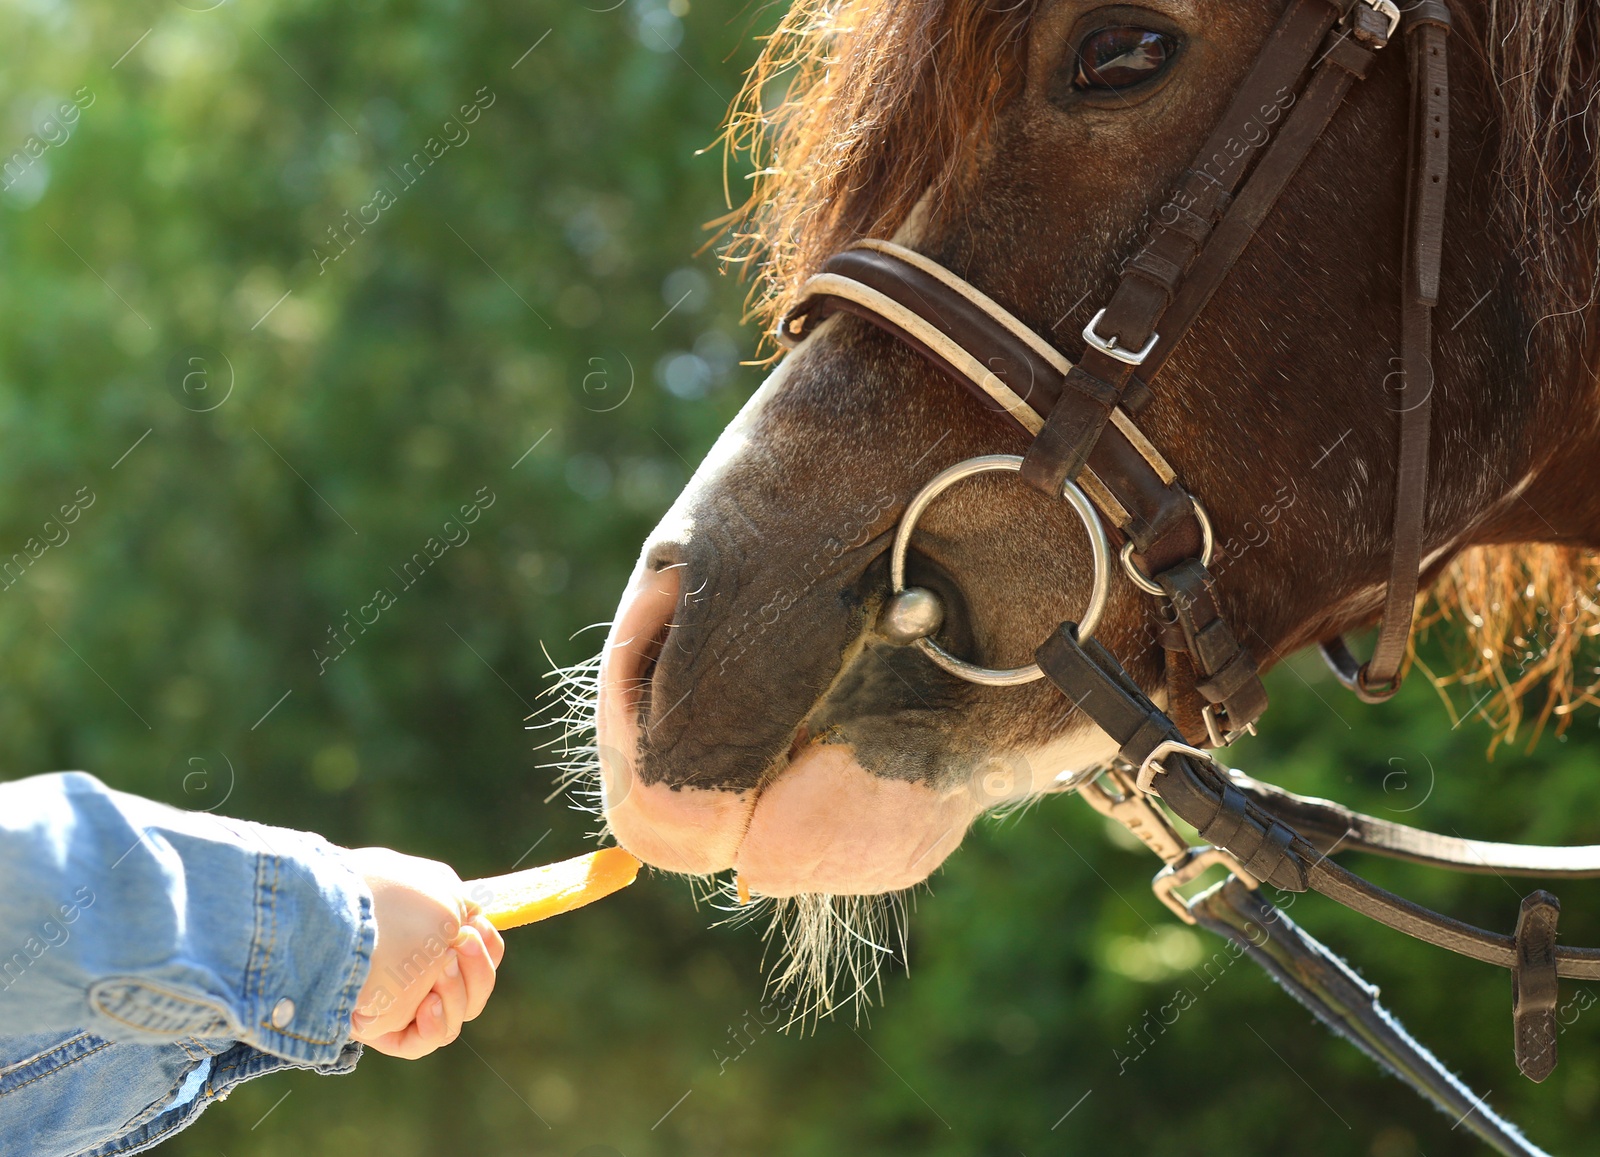 Photo of Little girl feeding her pony with carrot in green park, closeup